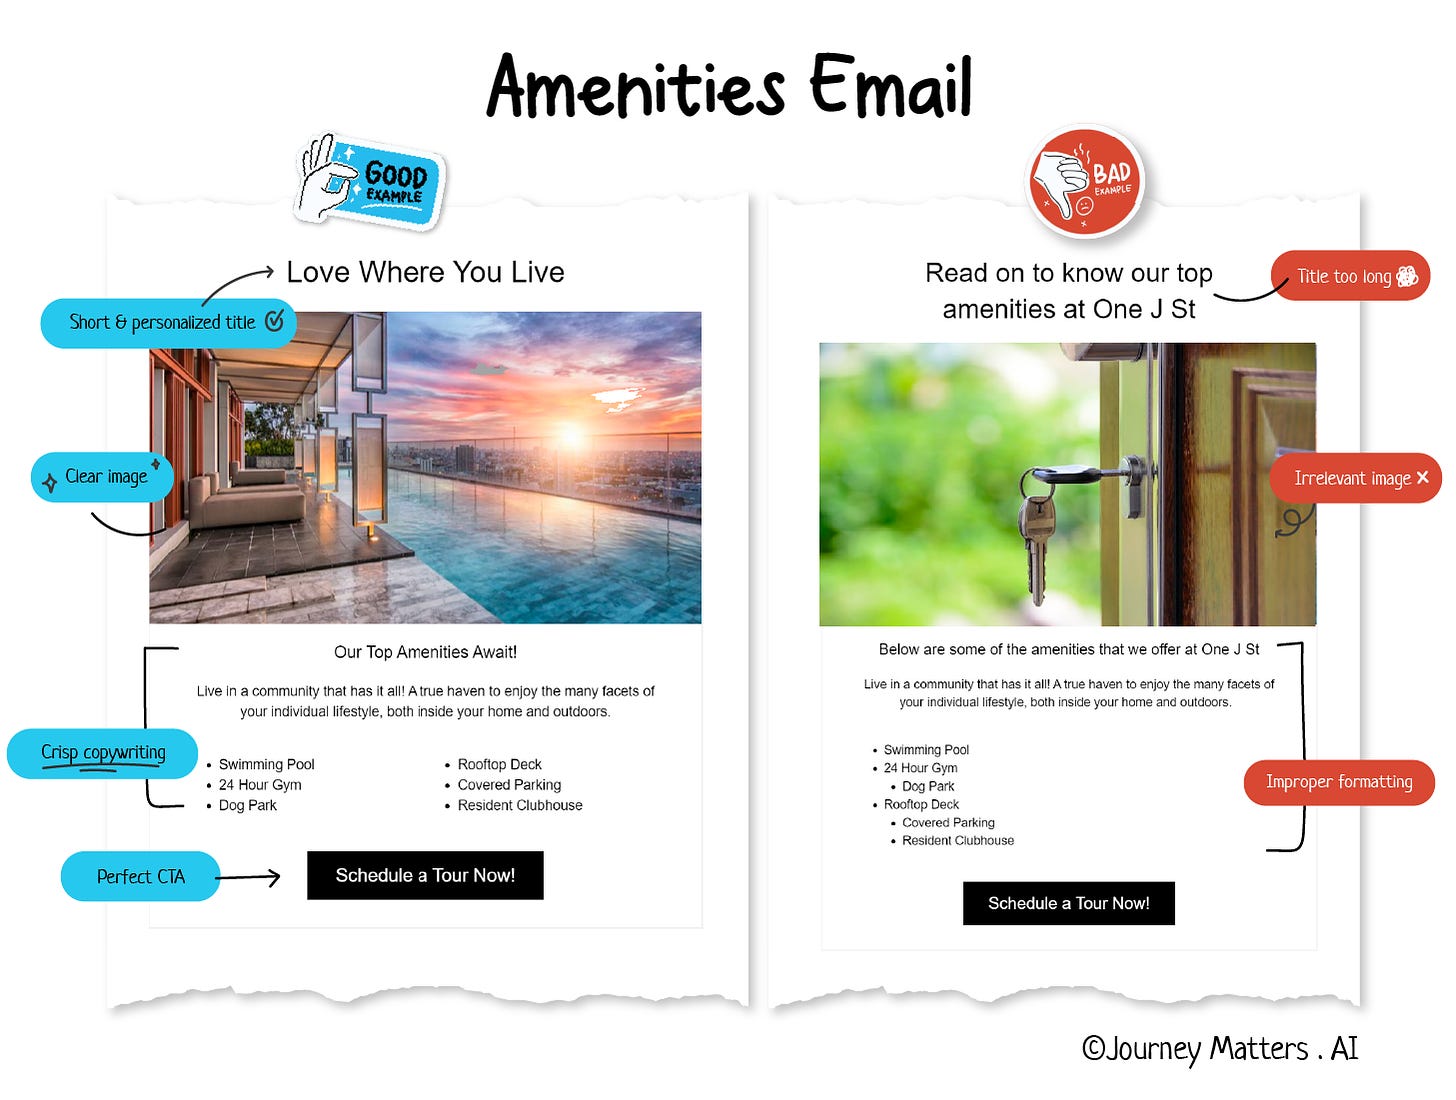 A good amenities email has a short and personalized title, a clear amenity image, crisp copywriting, and a clear CTA, while a poor email lacks all or some of the above points